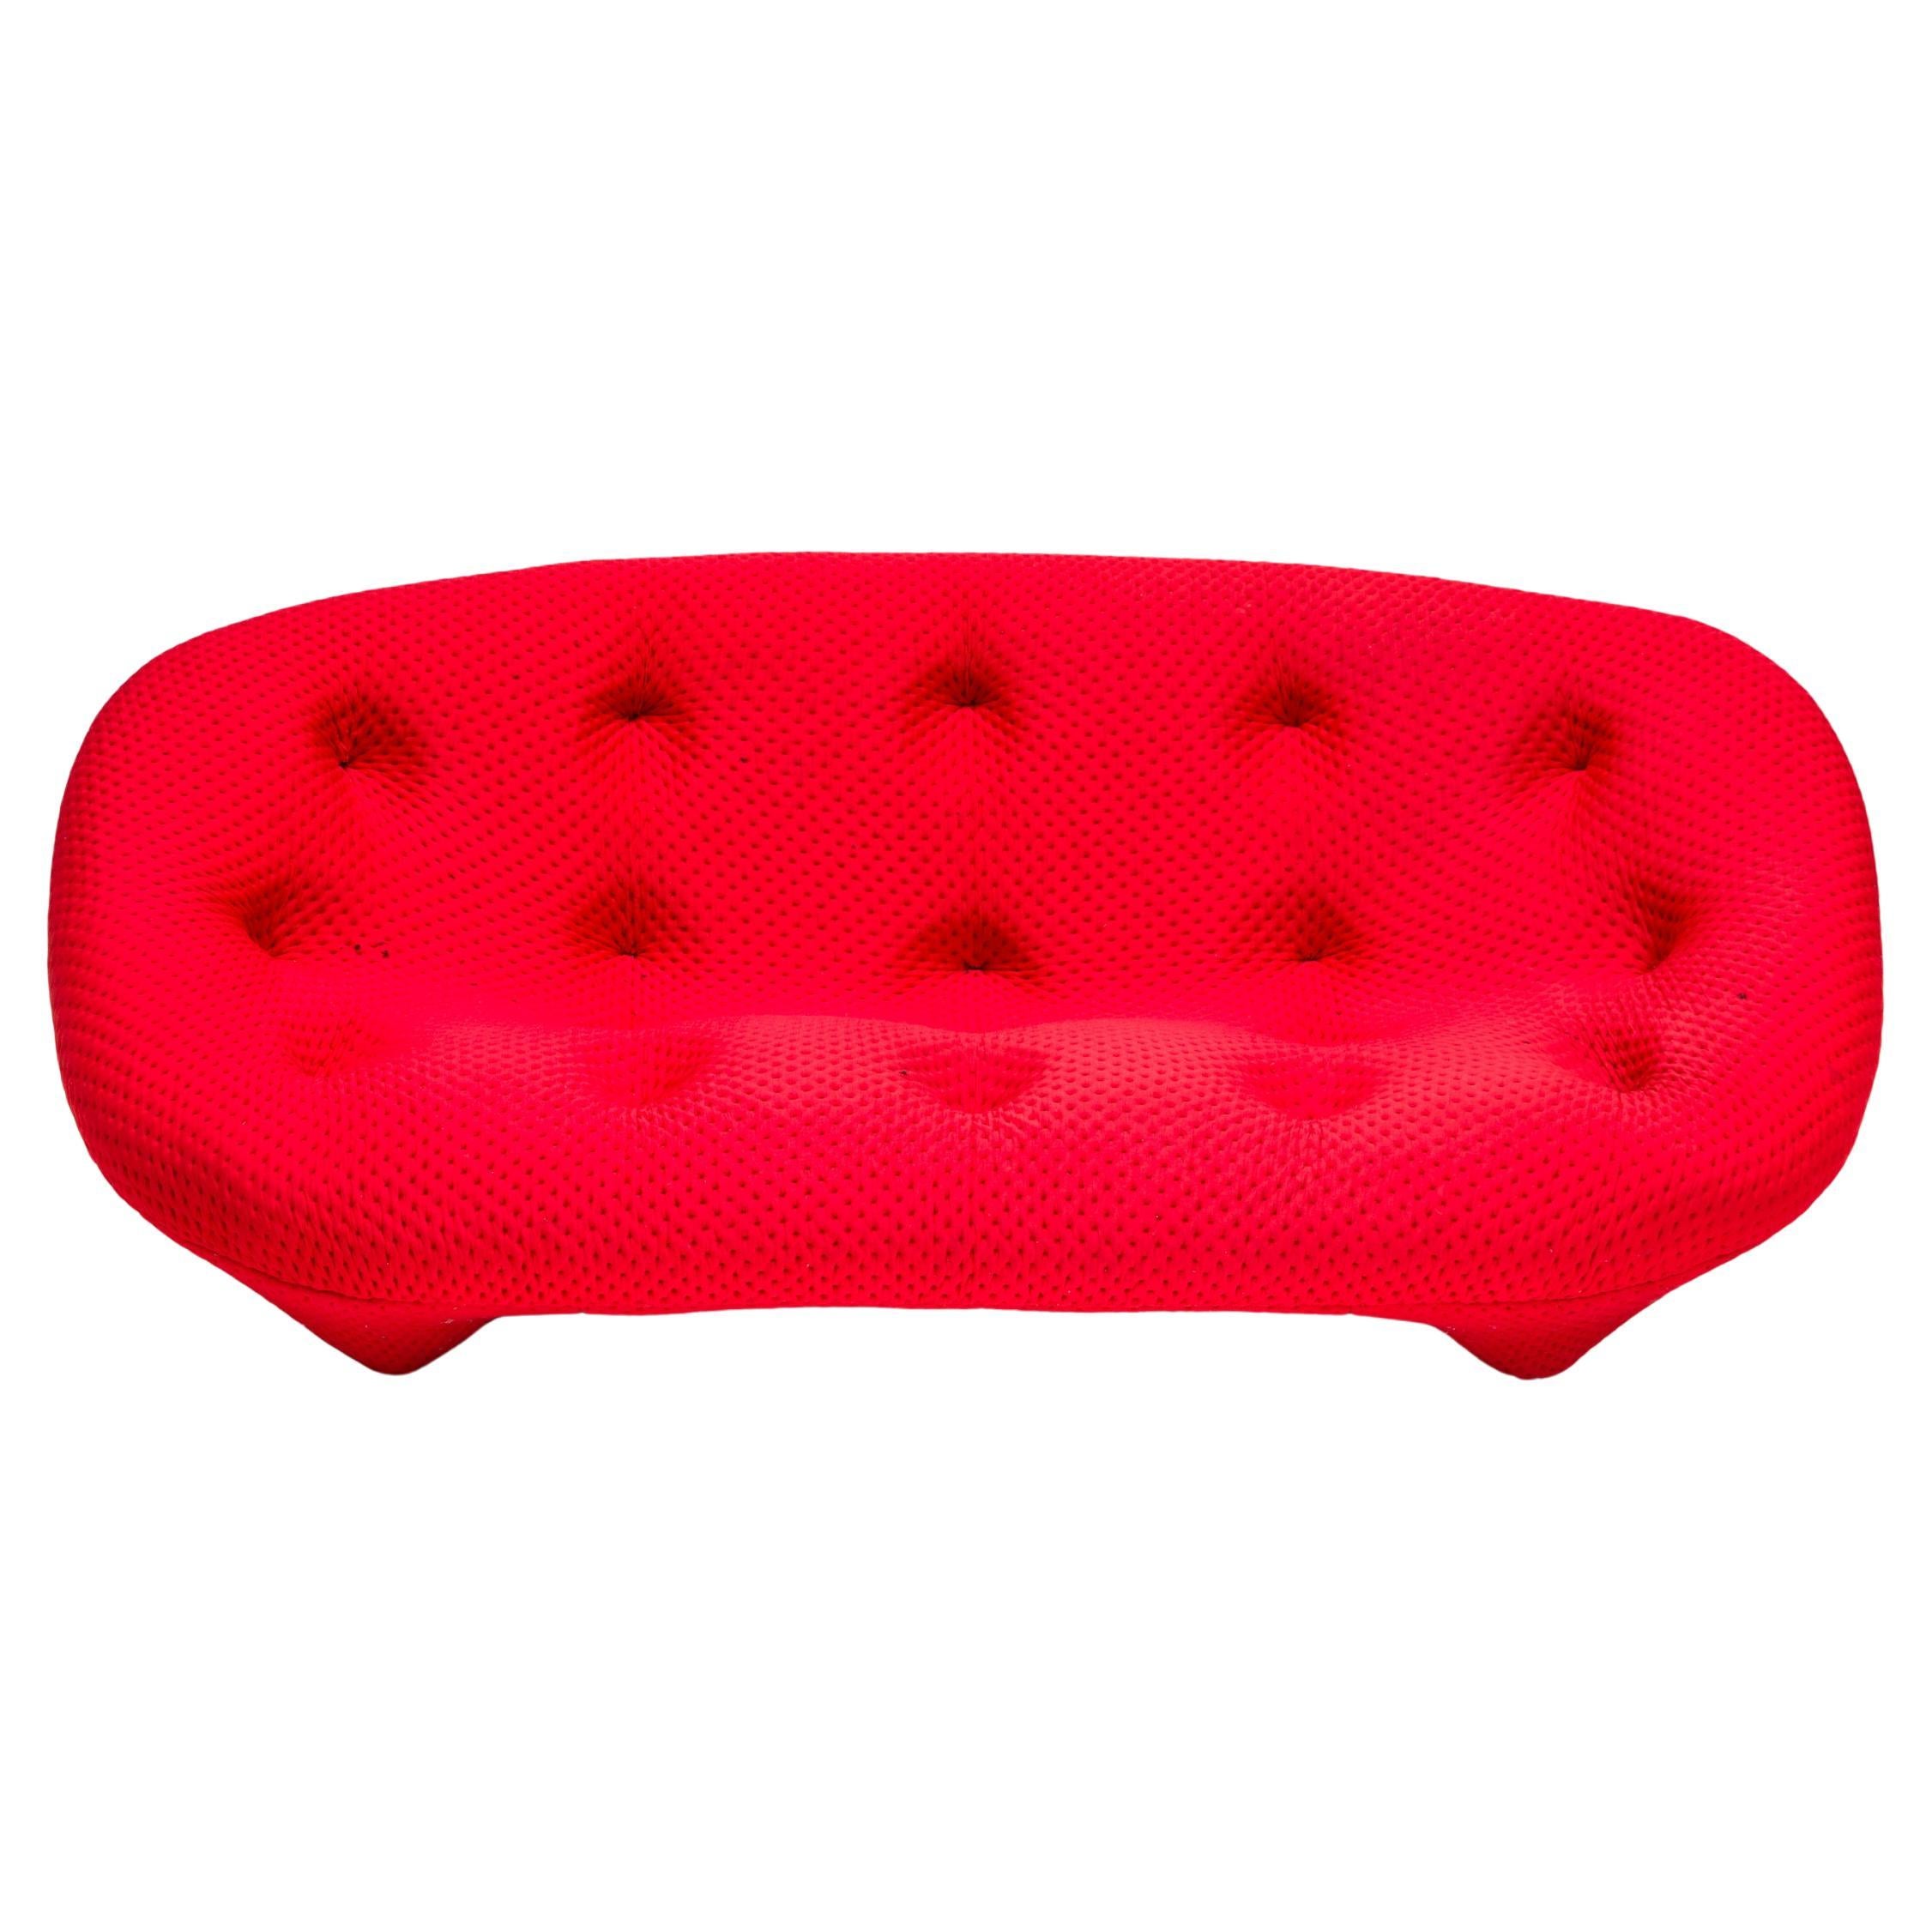 Ligne Roset by Erwan & Ronan Bouroullec Ploum High Back Red Sofa For Sale